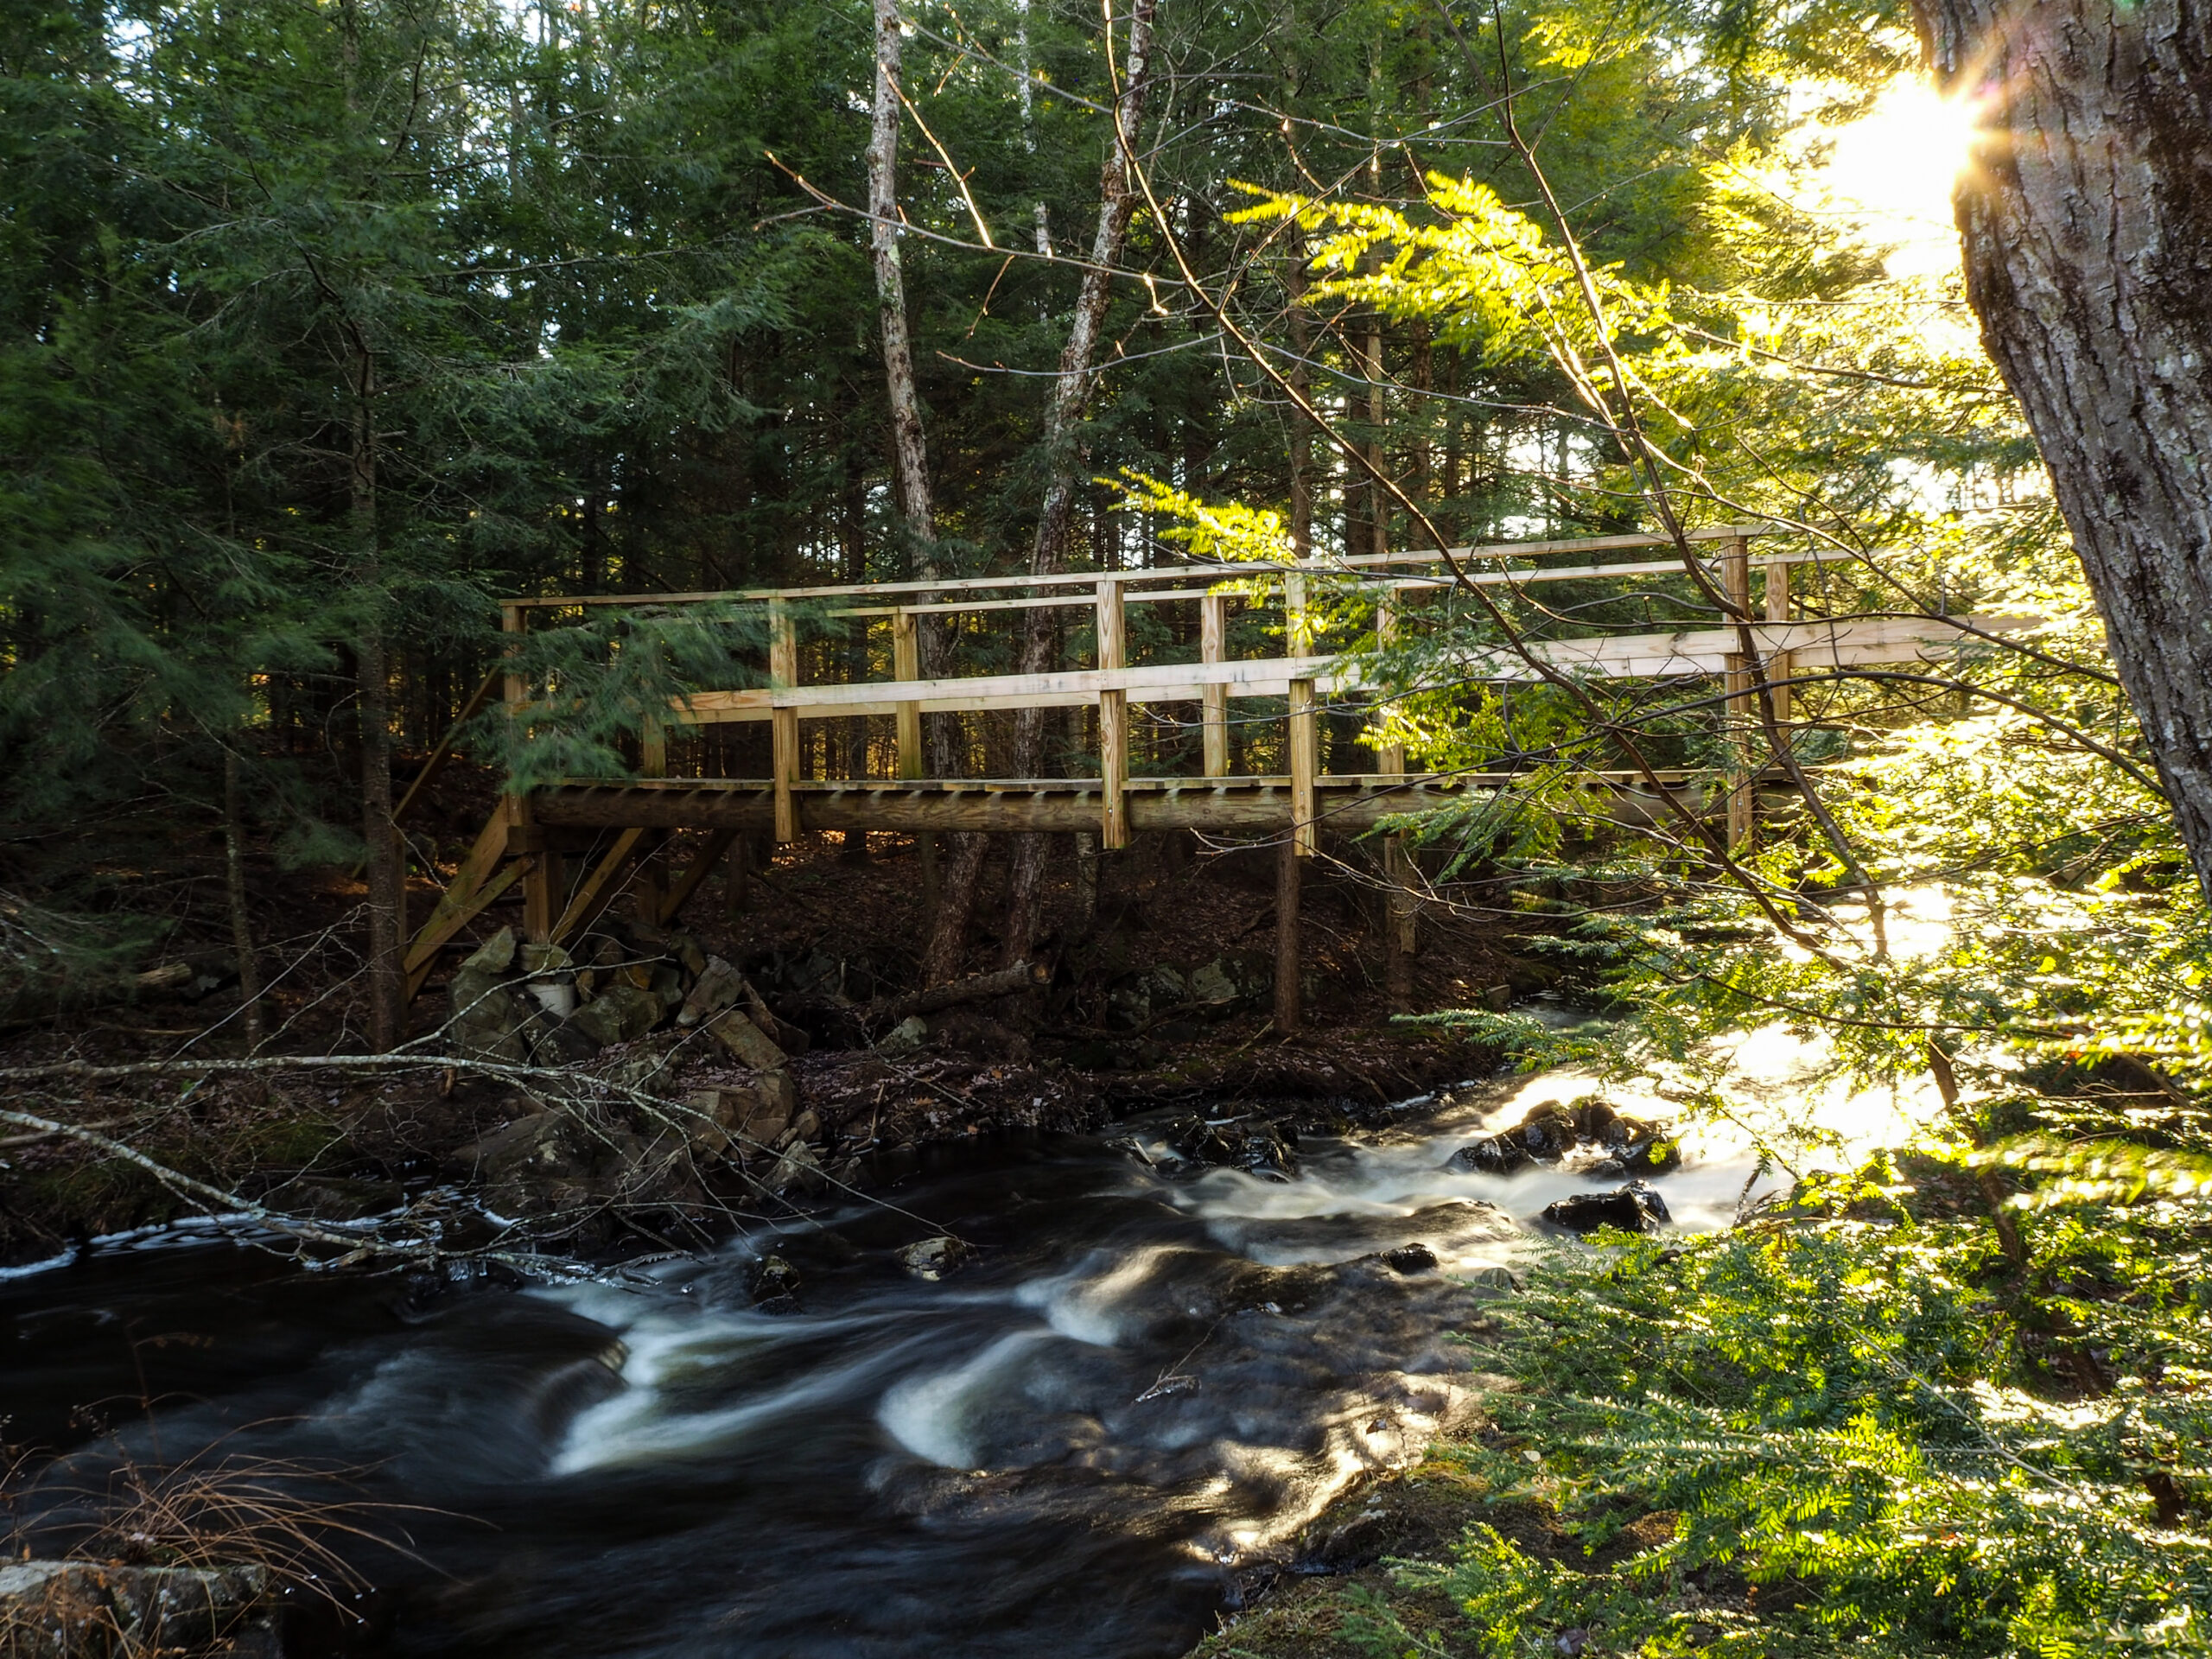 A classic wooden bridge provides a peaceful crossing over a secluded stream in the heart of the forest.